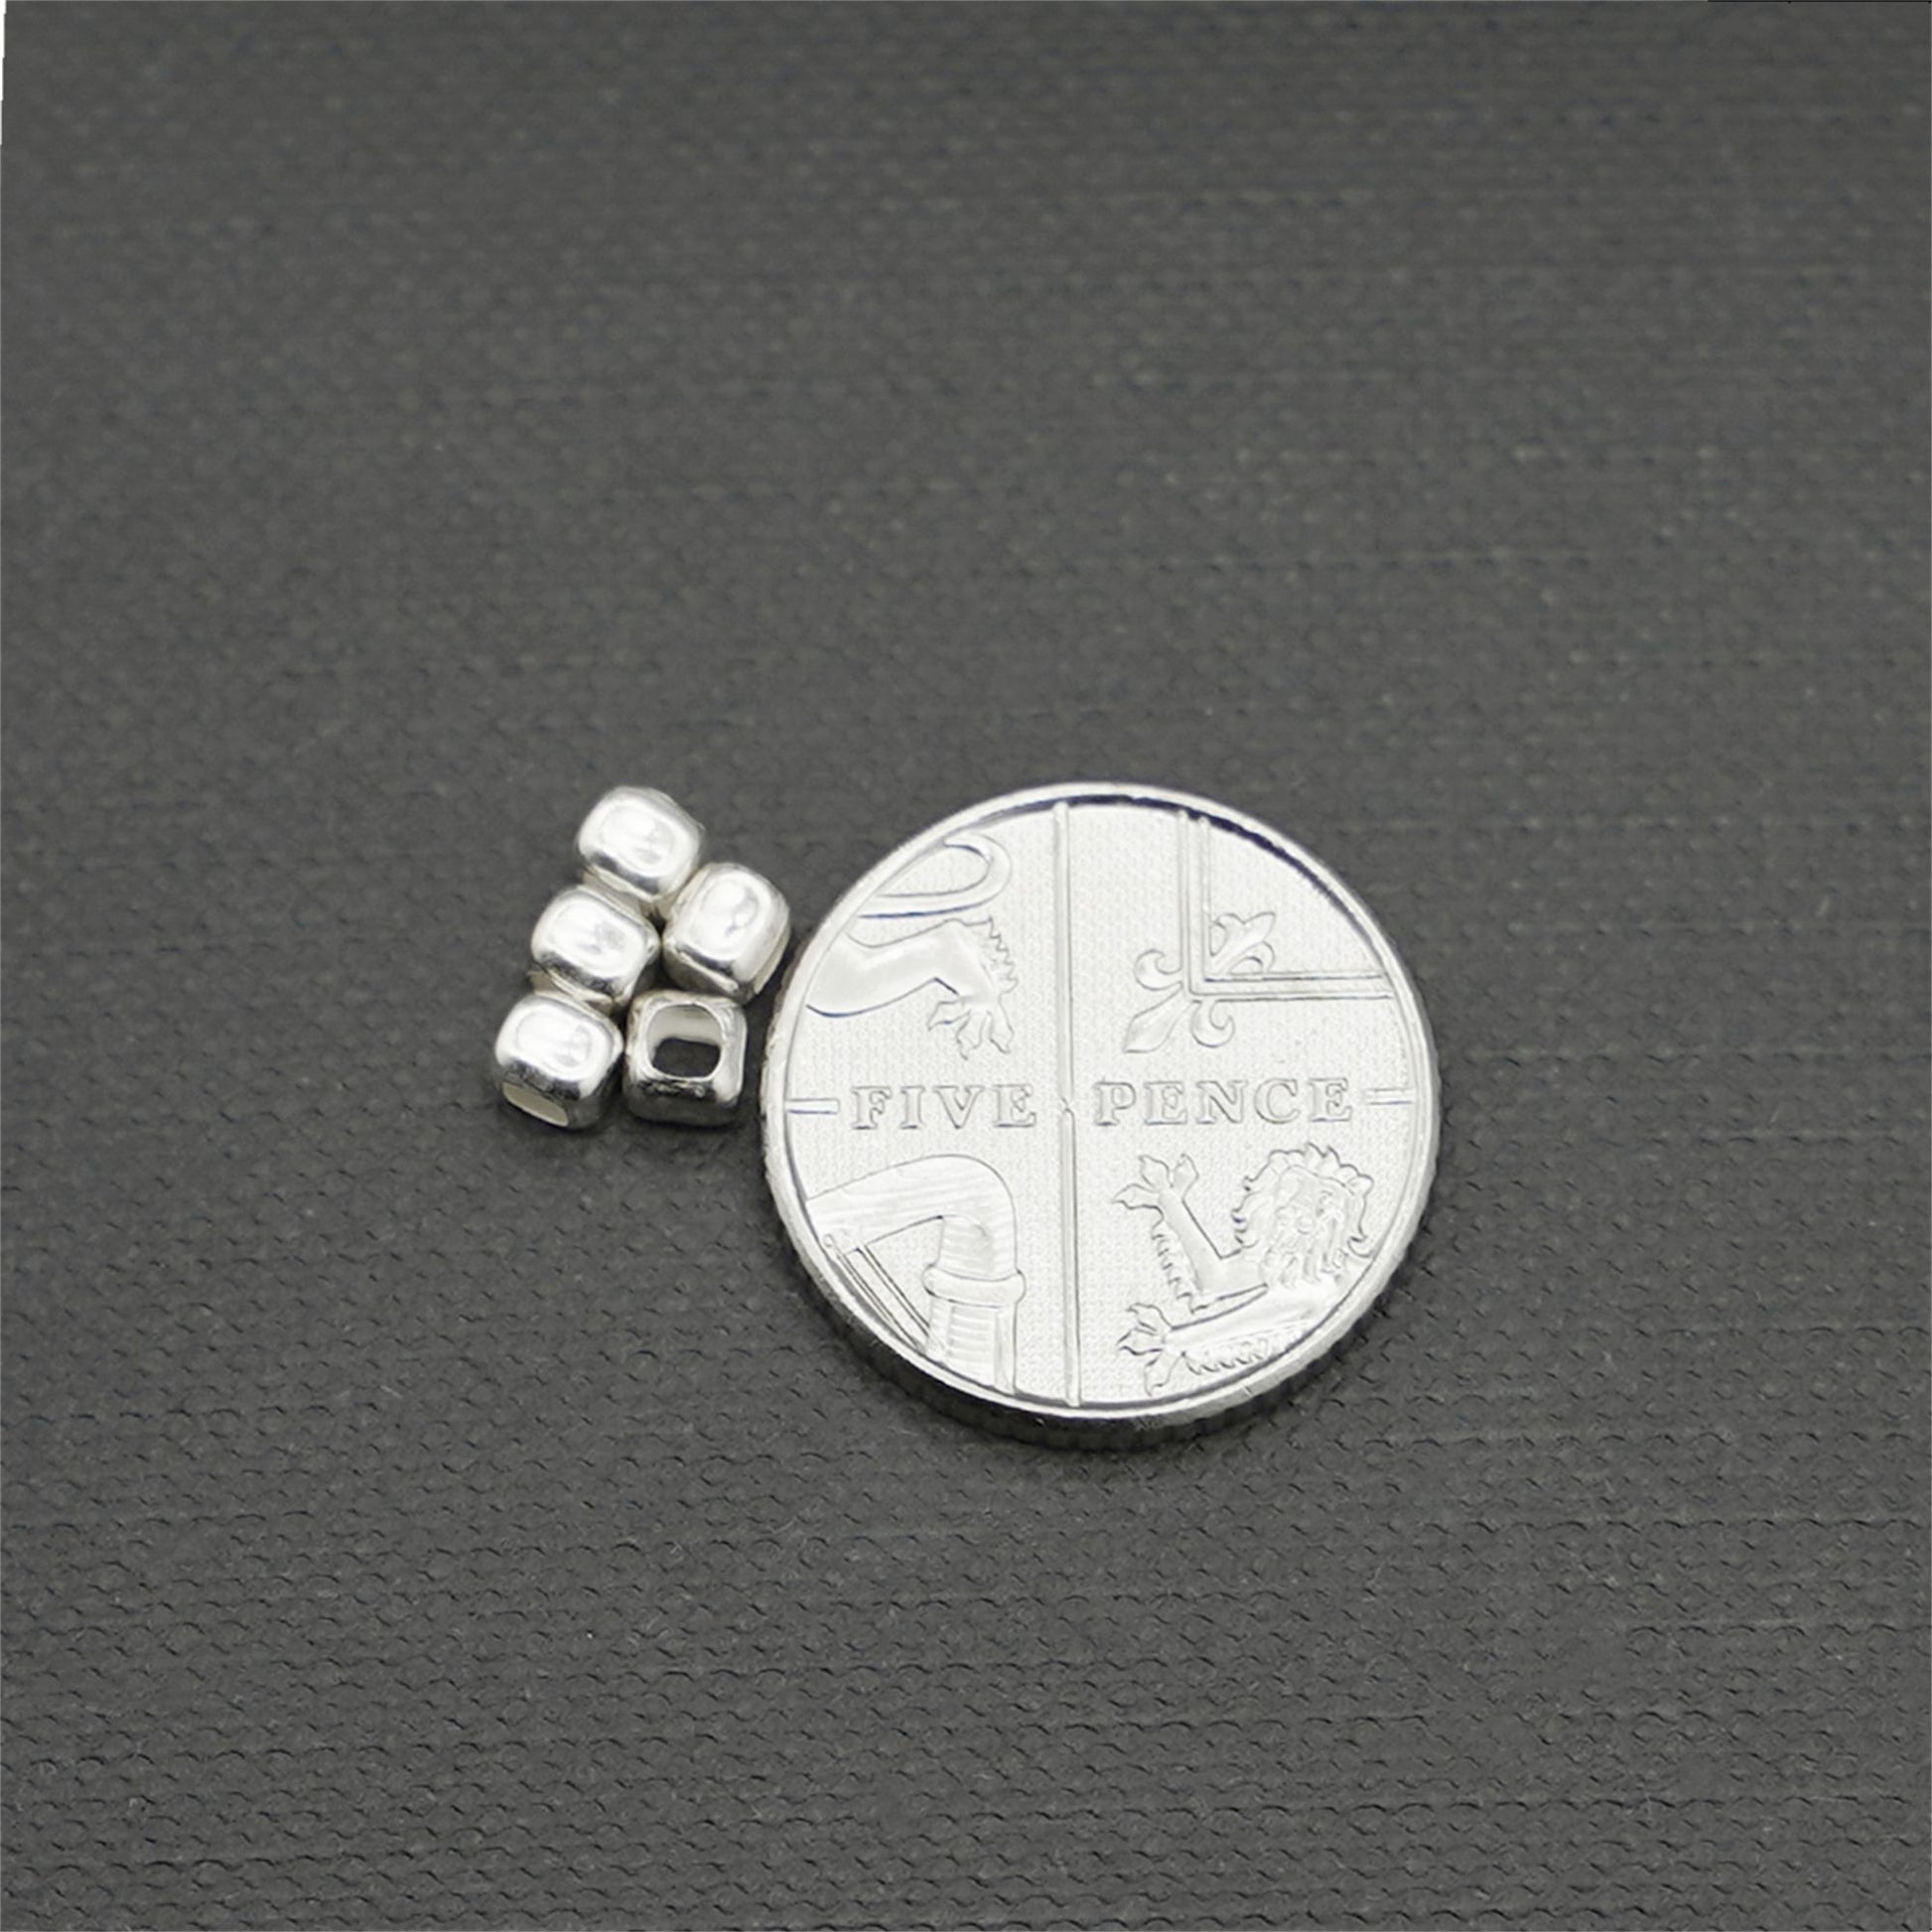 925 Sterling Silver 3mm Cube Charm pendant Beads , for Bracelets, Necklaces, and More - sugarkittenlondon